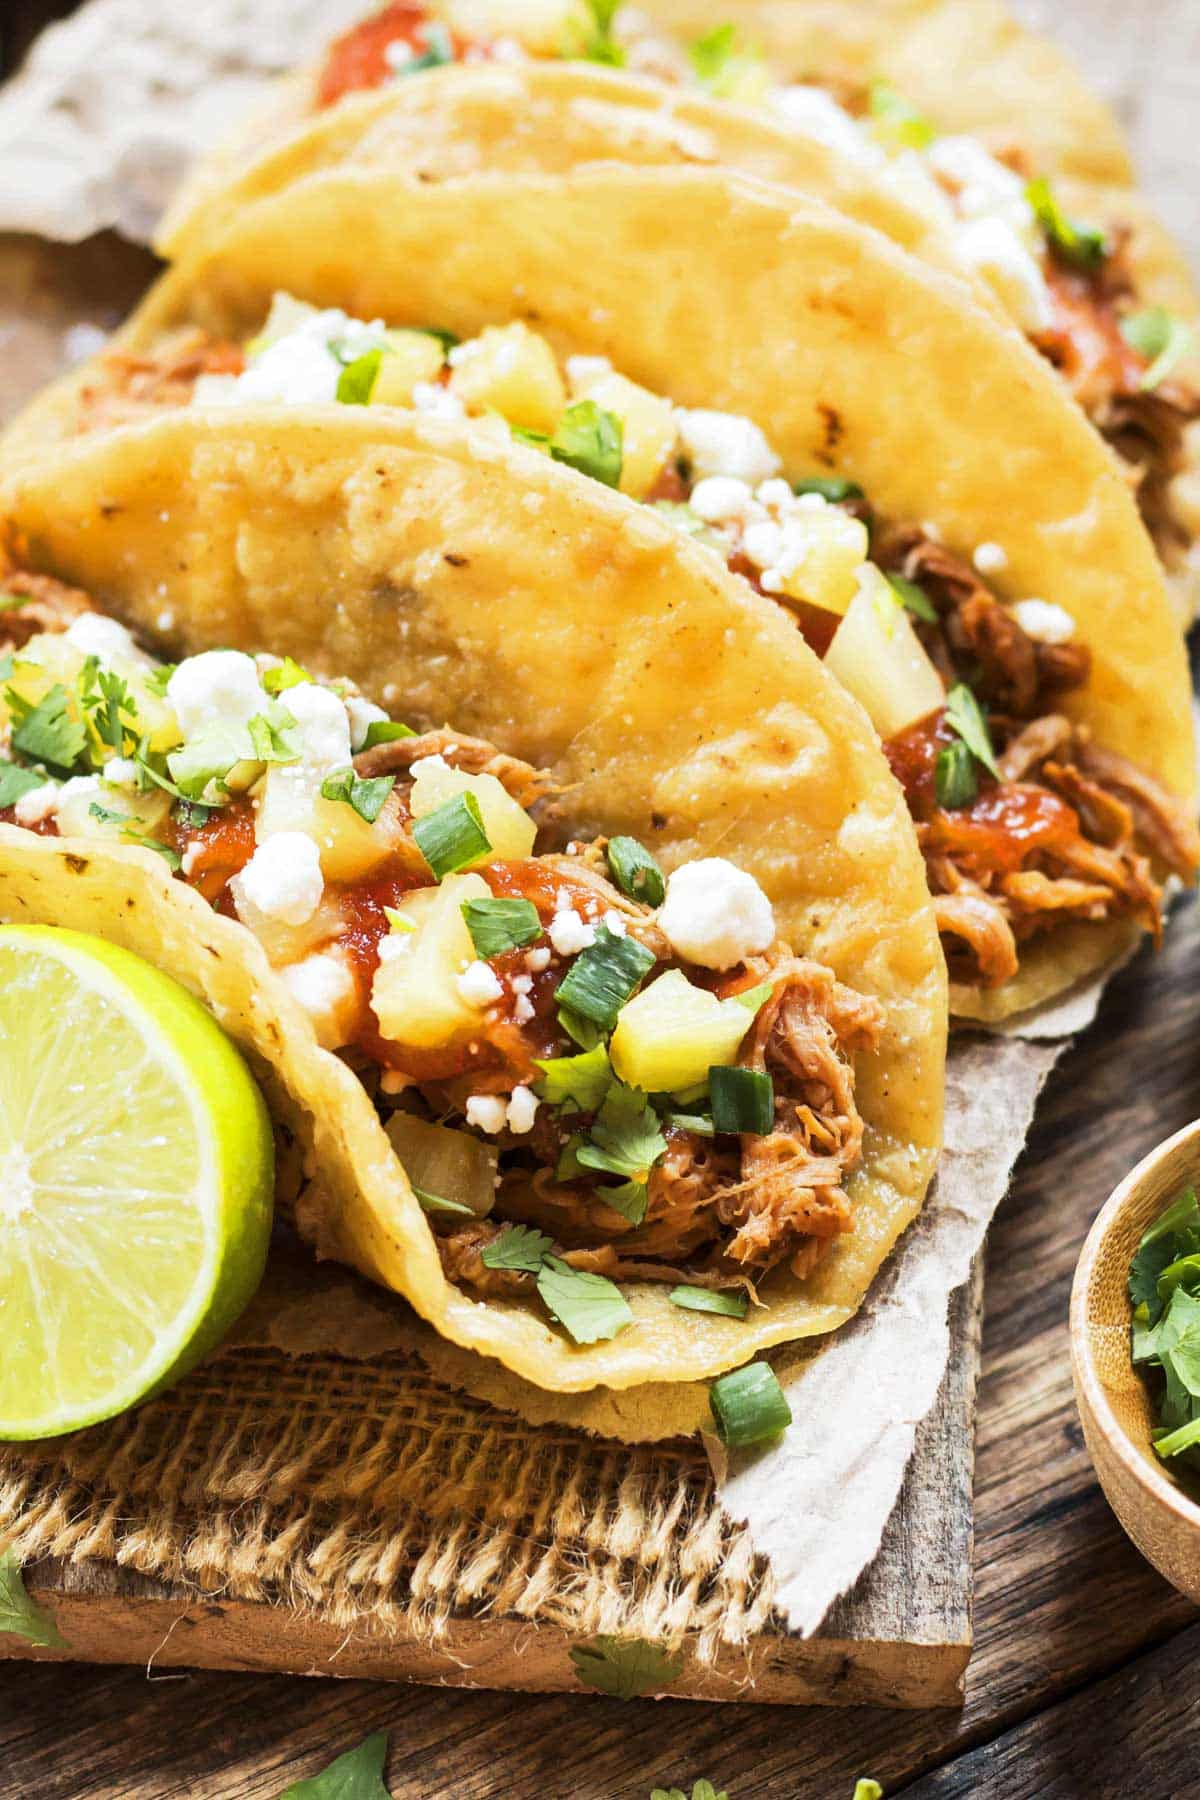 Gluten-free Pineapple Pulled Pork Tacos made in the slow cooker ready to serve for dinner.